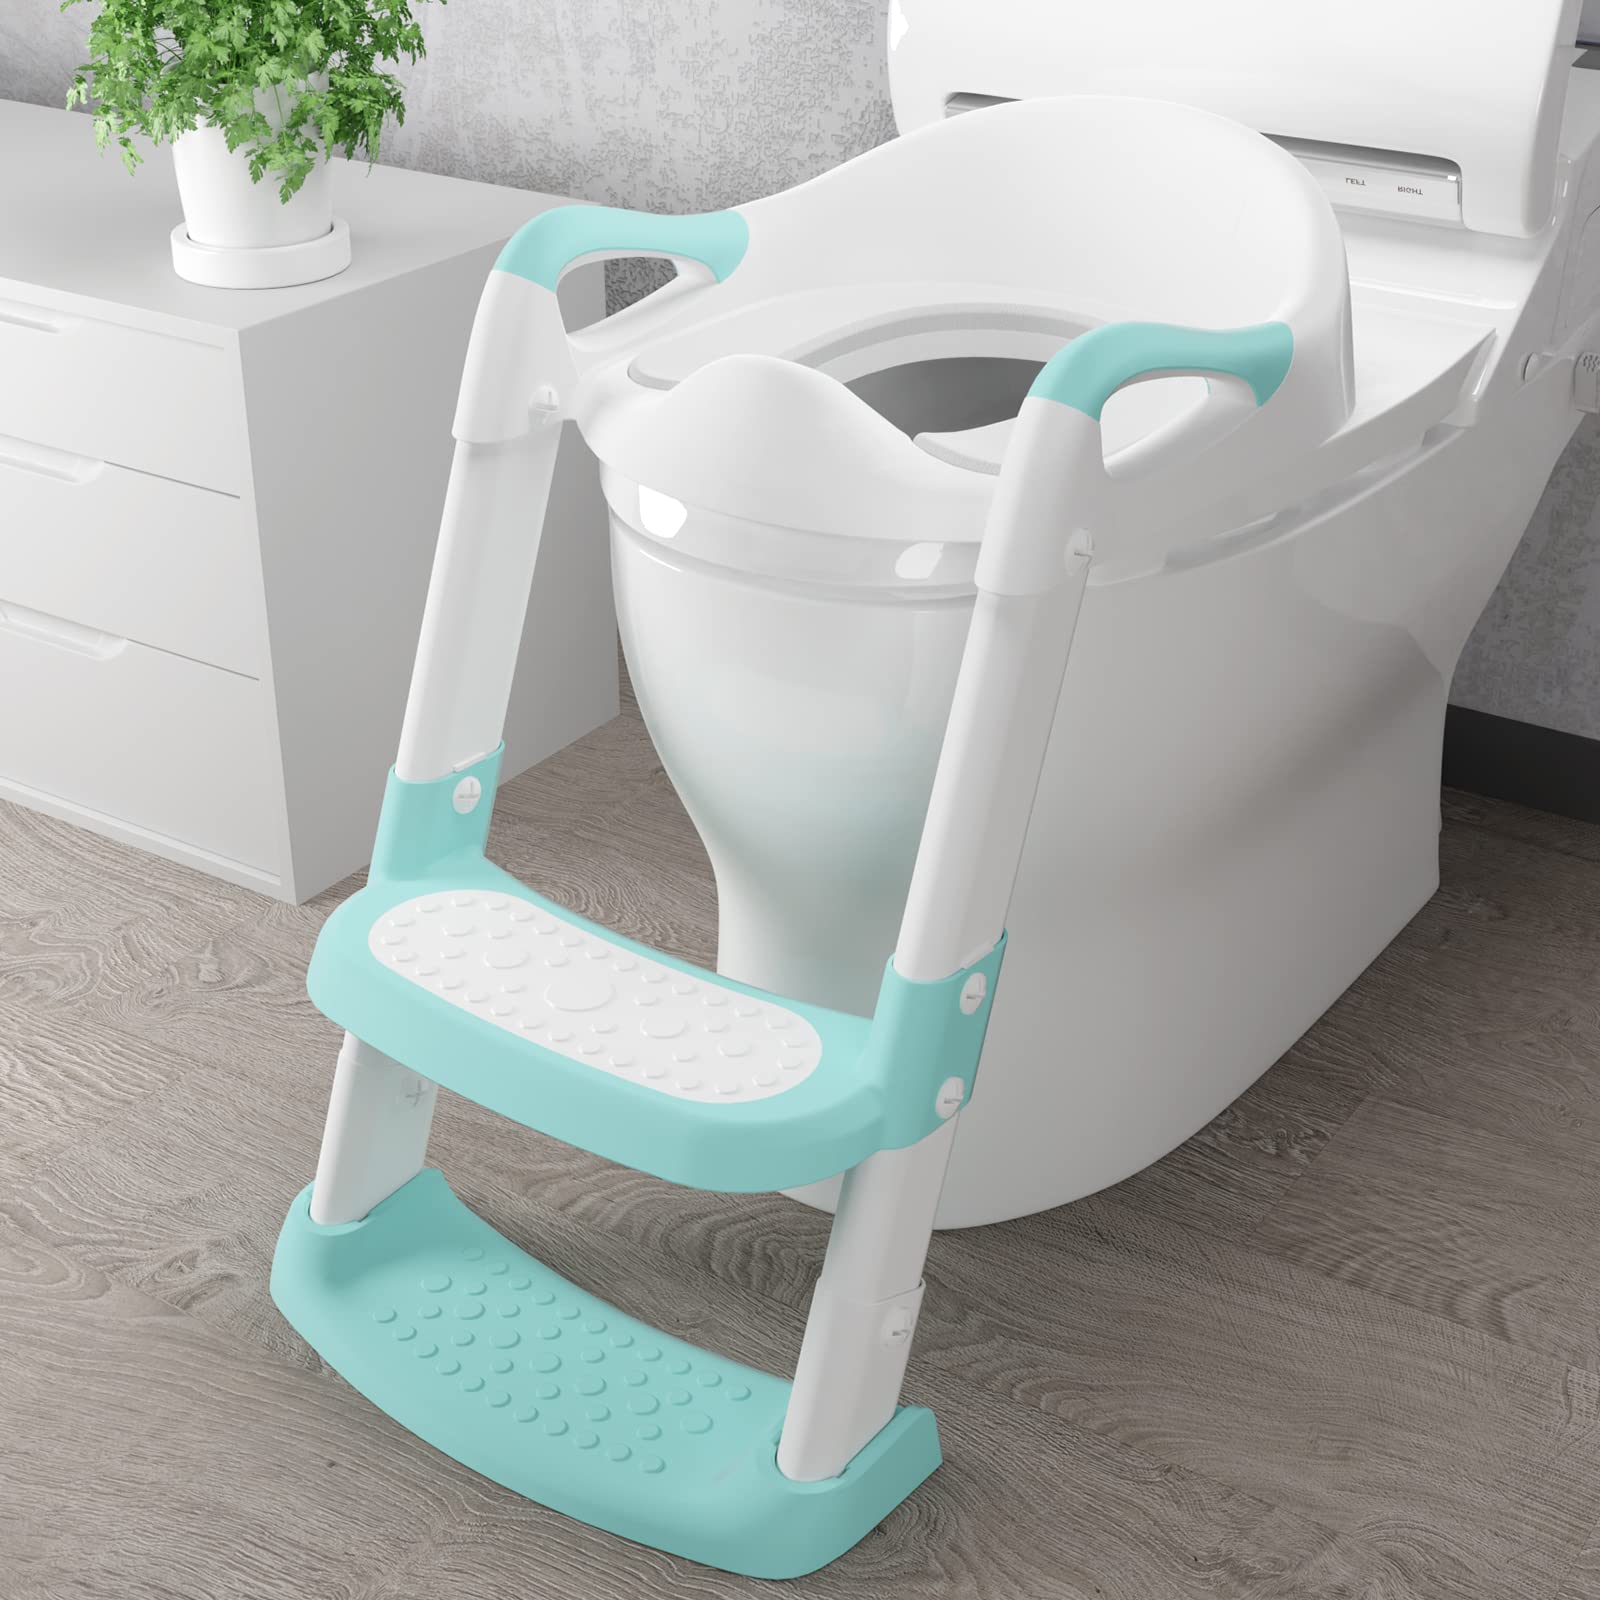 Potty Training Toilet Seat with Steps Stool Ladder For Children